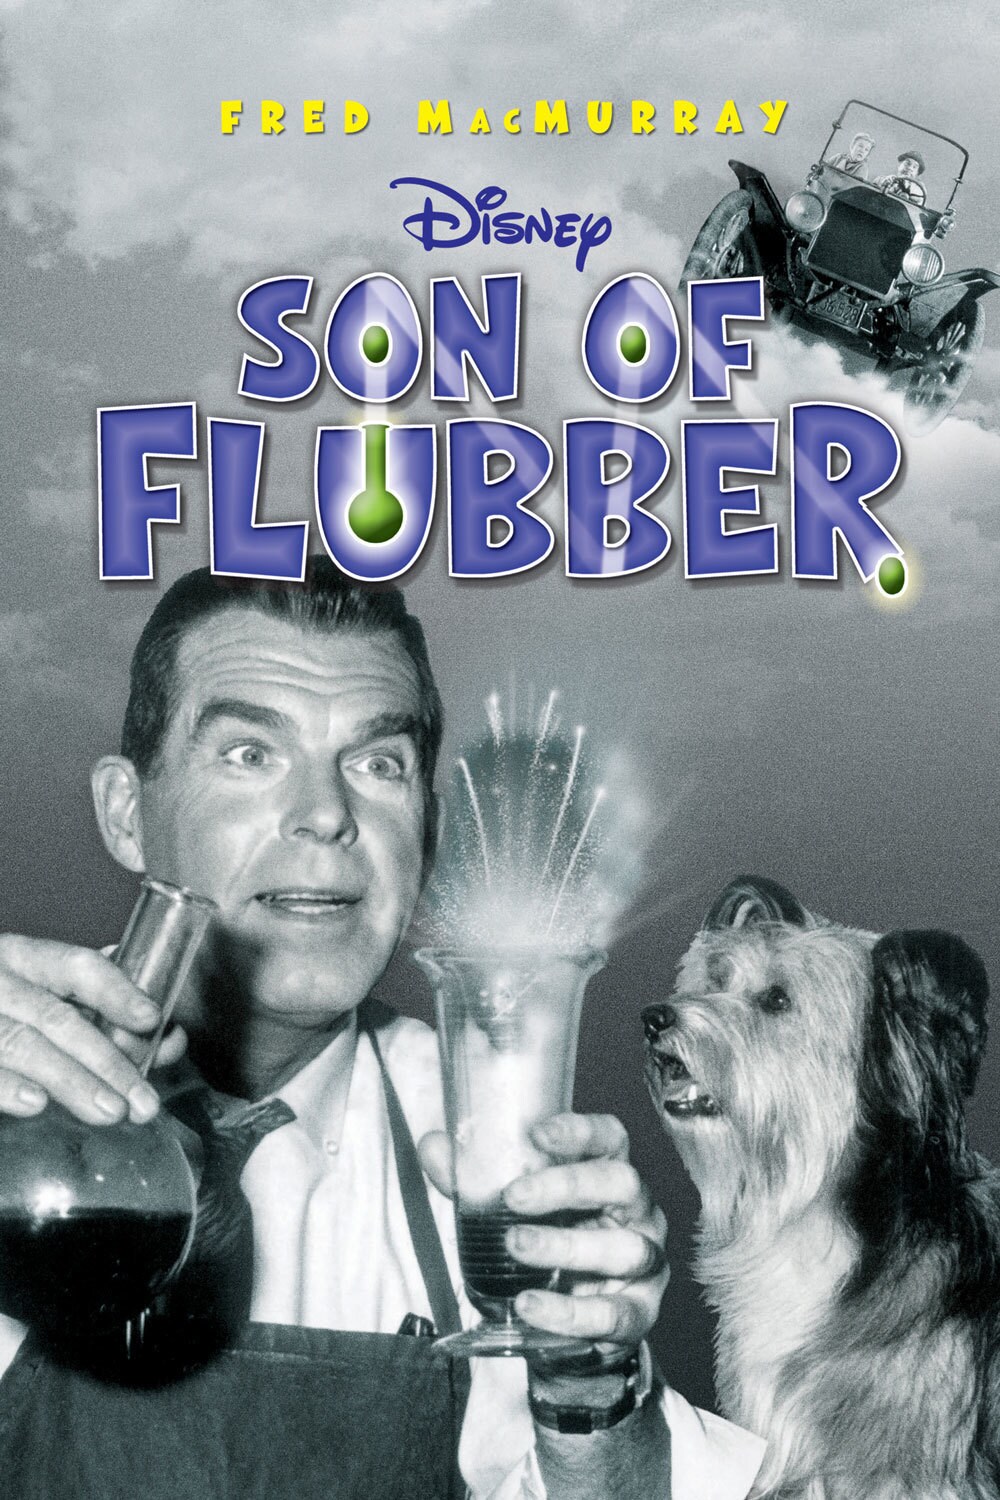 flubber full movie free download in tamil